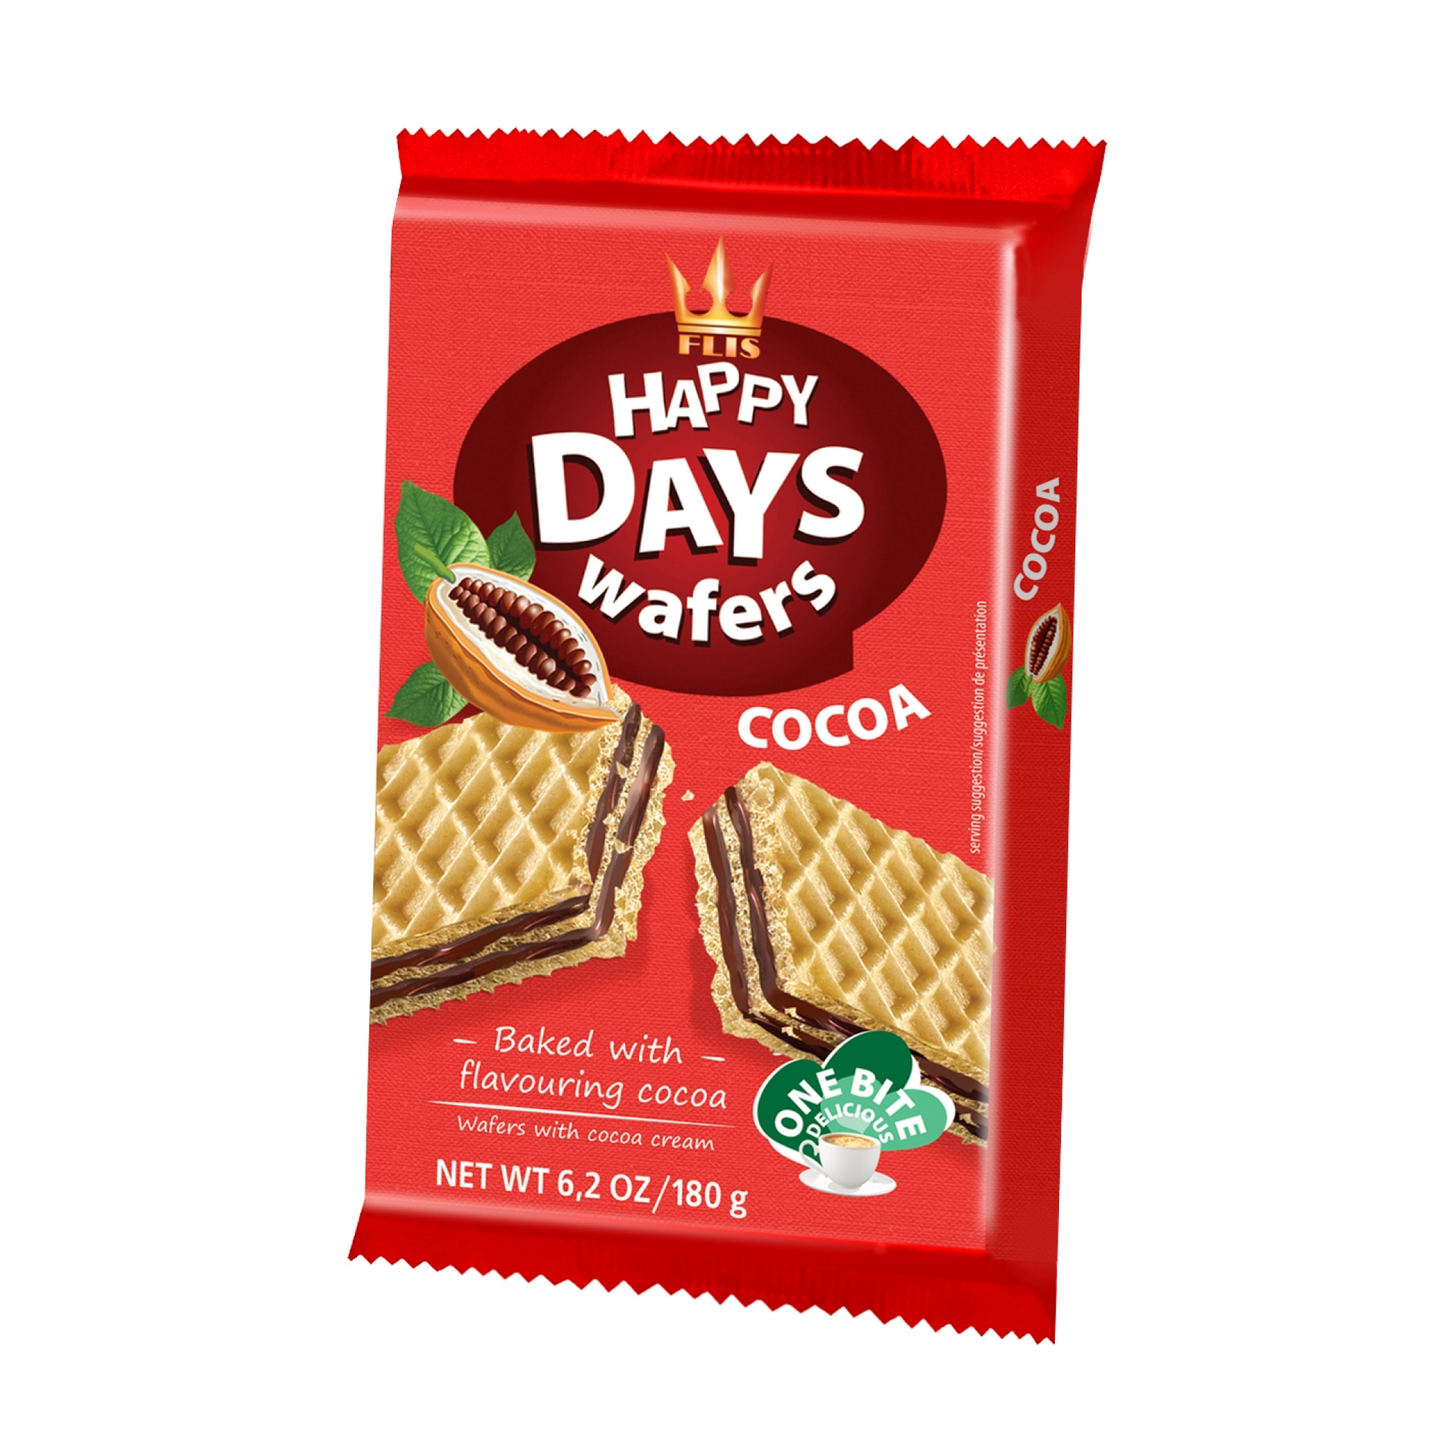 Happy Days Wafers Cocoa 180g